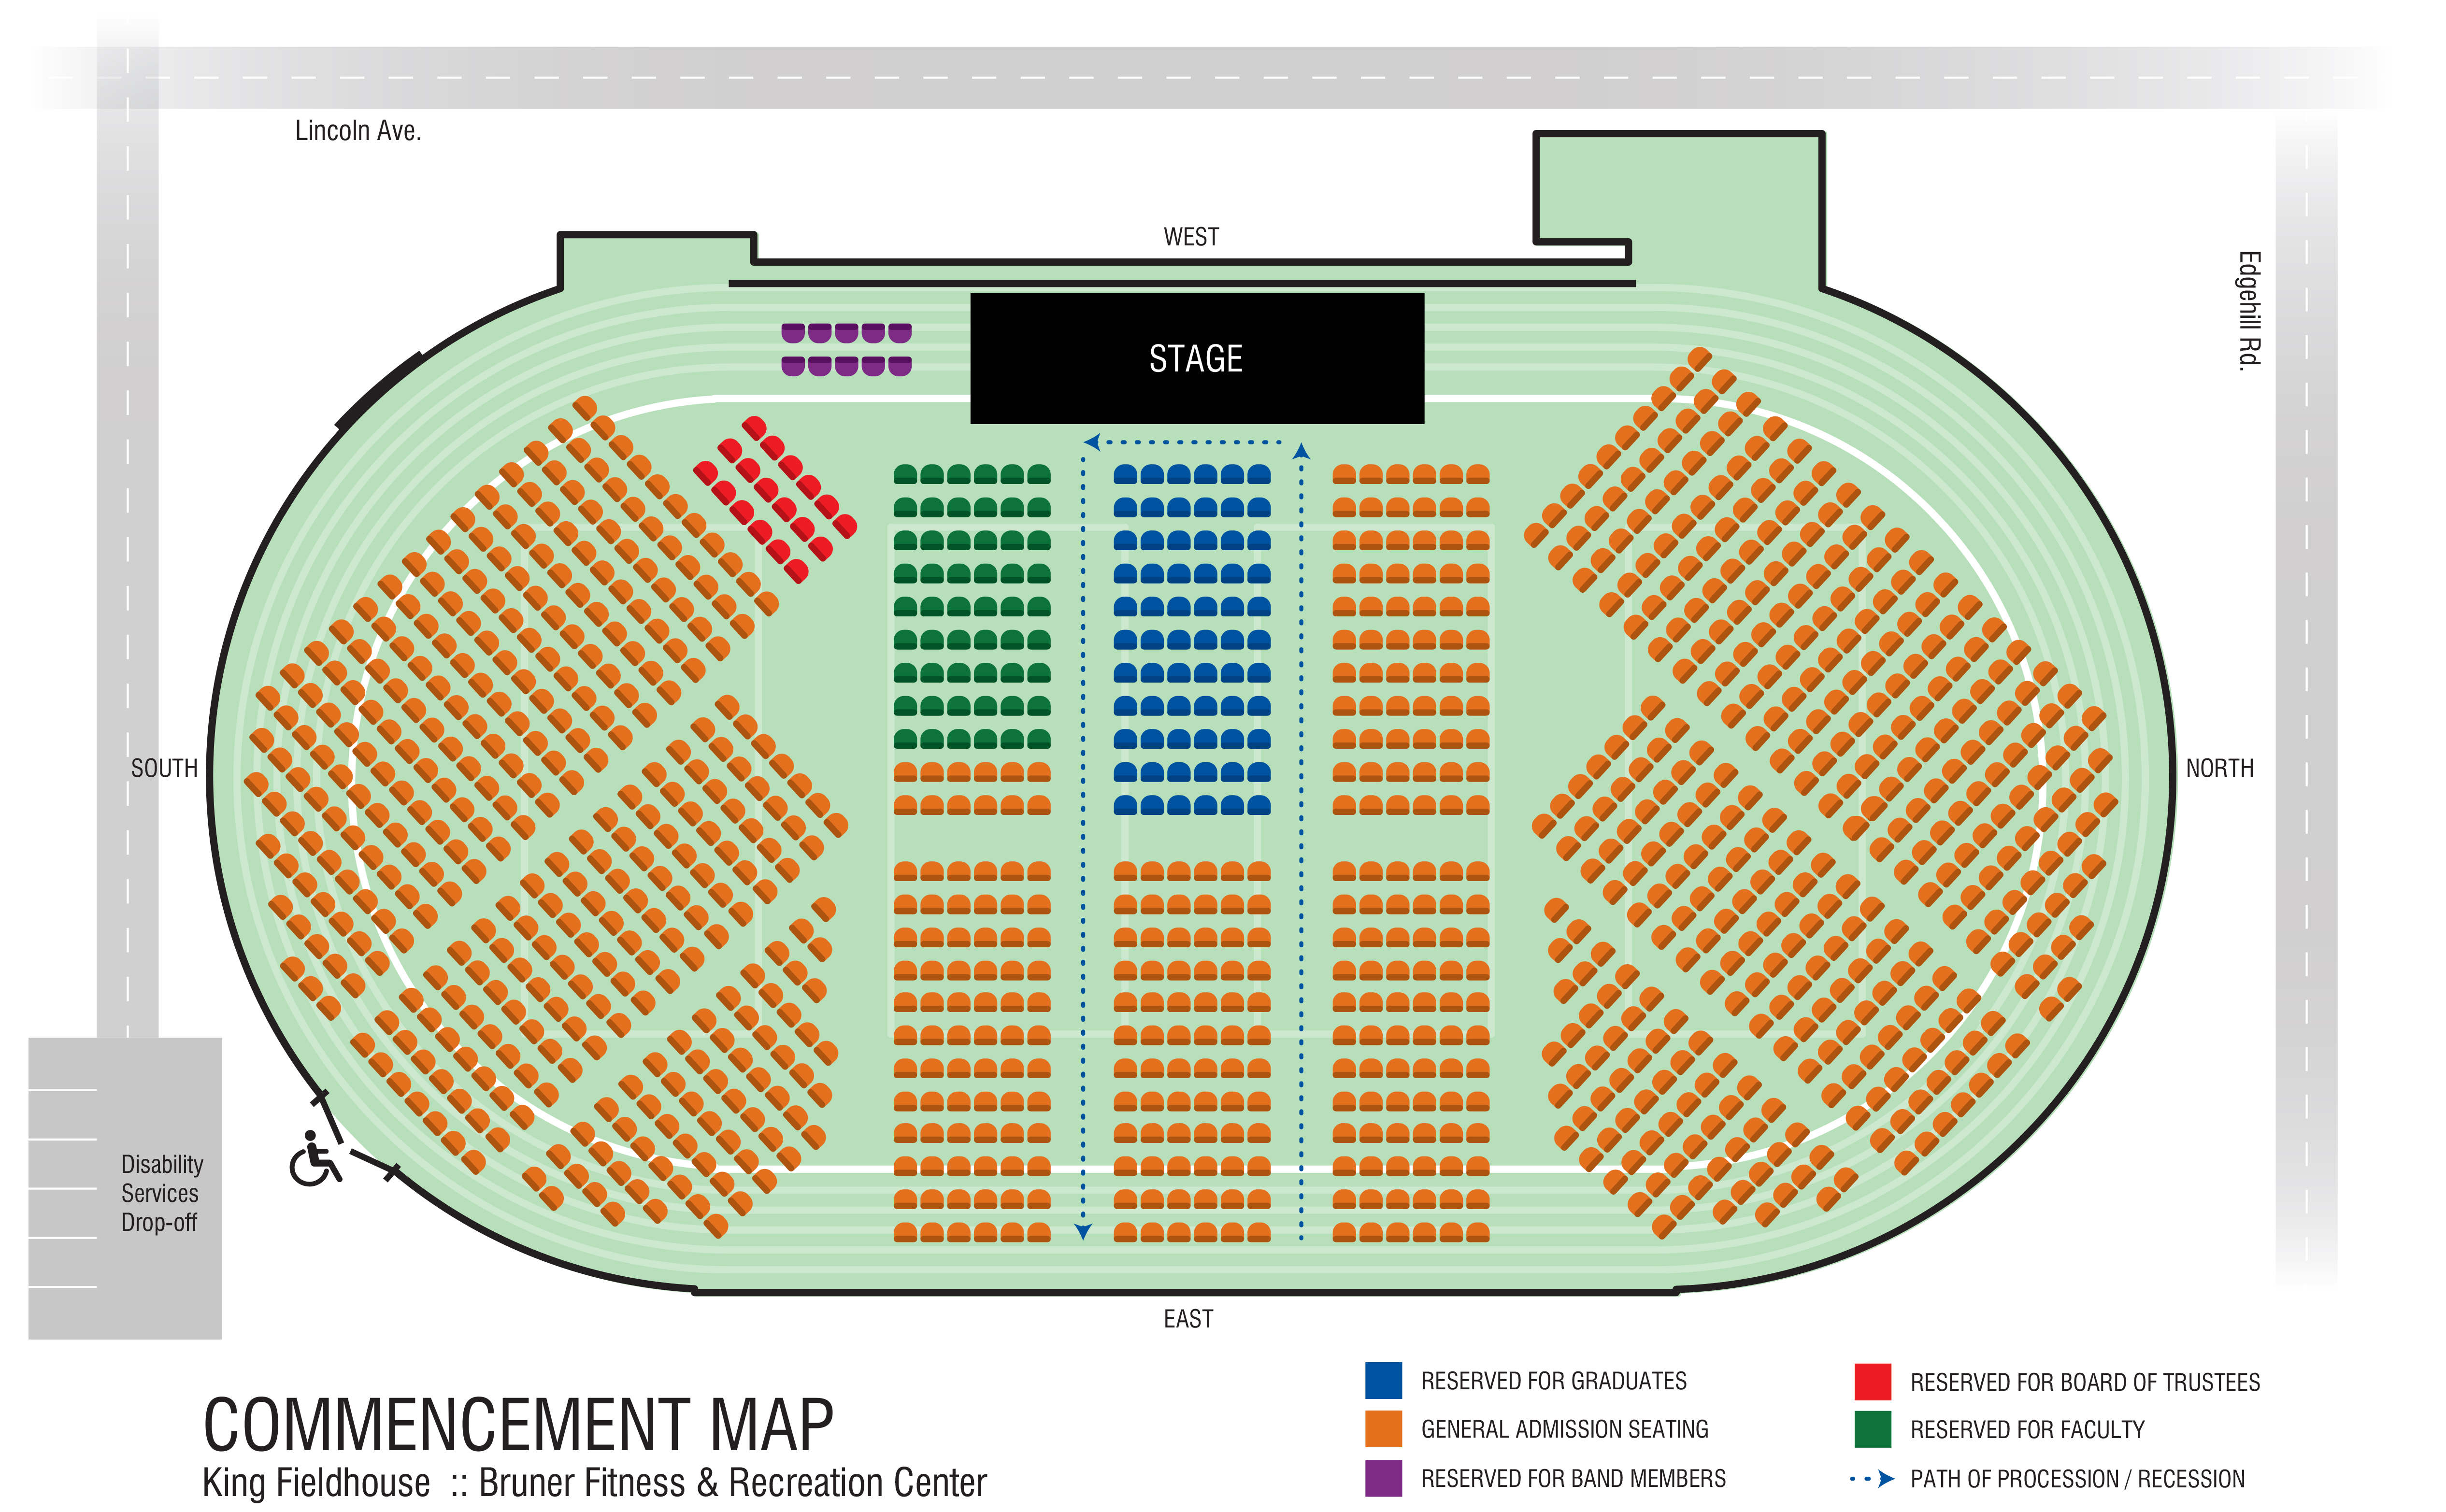 2022 Commencement seating map image